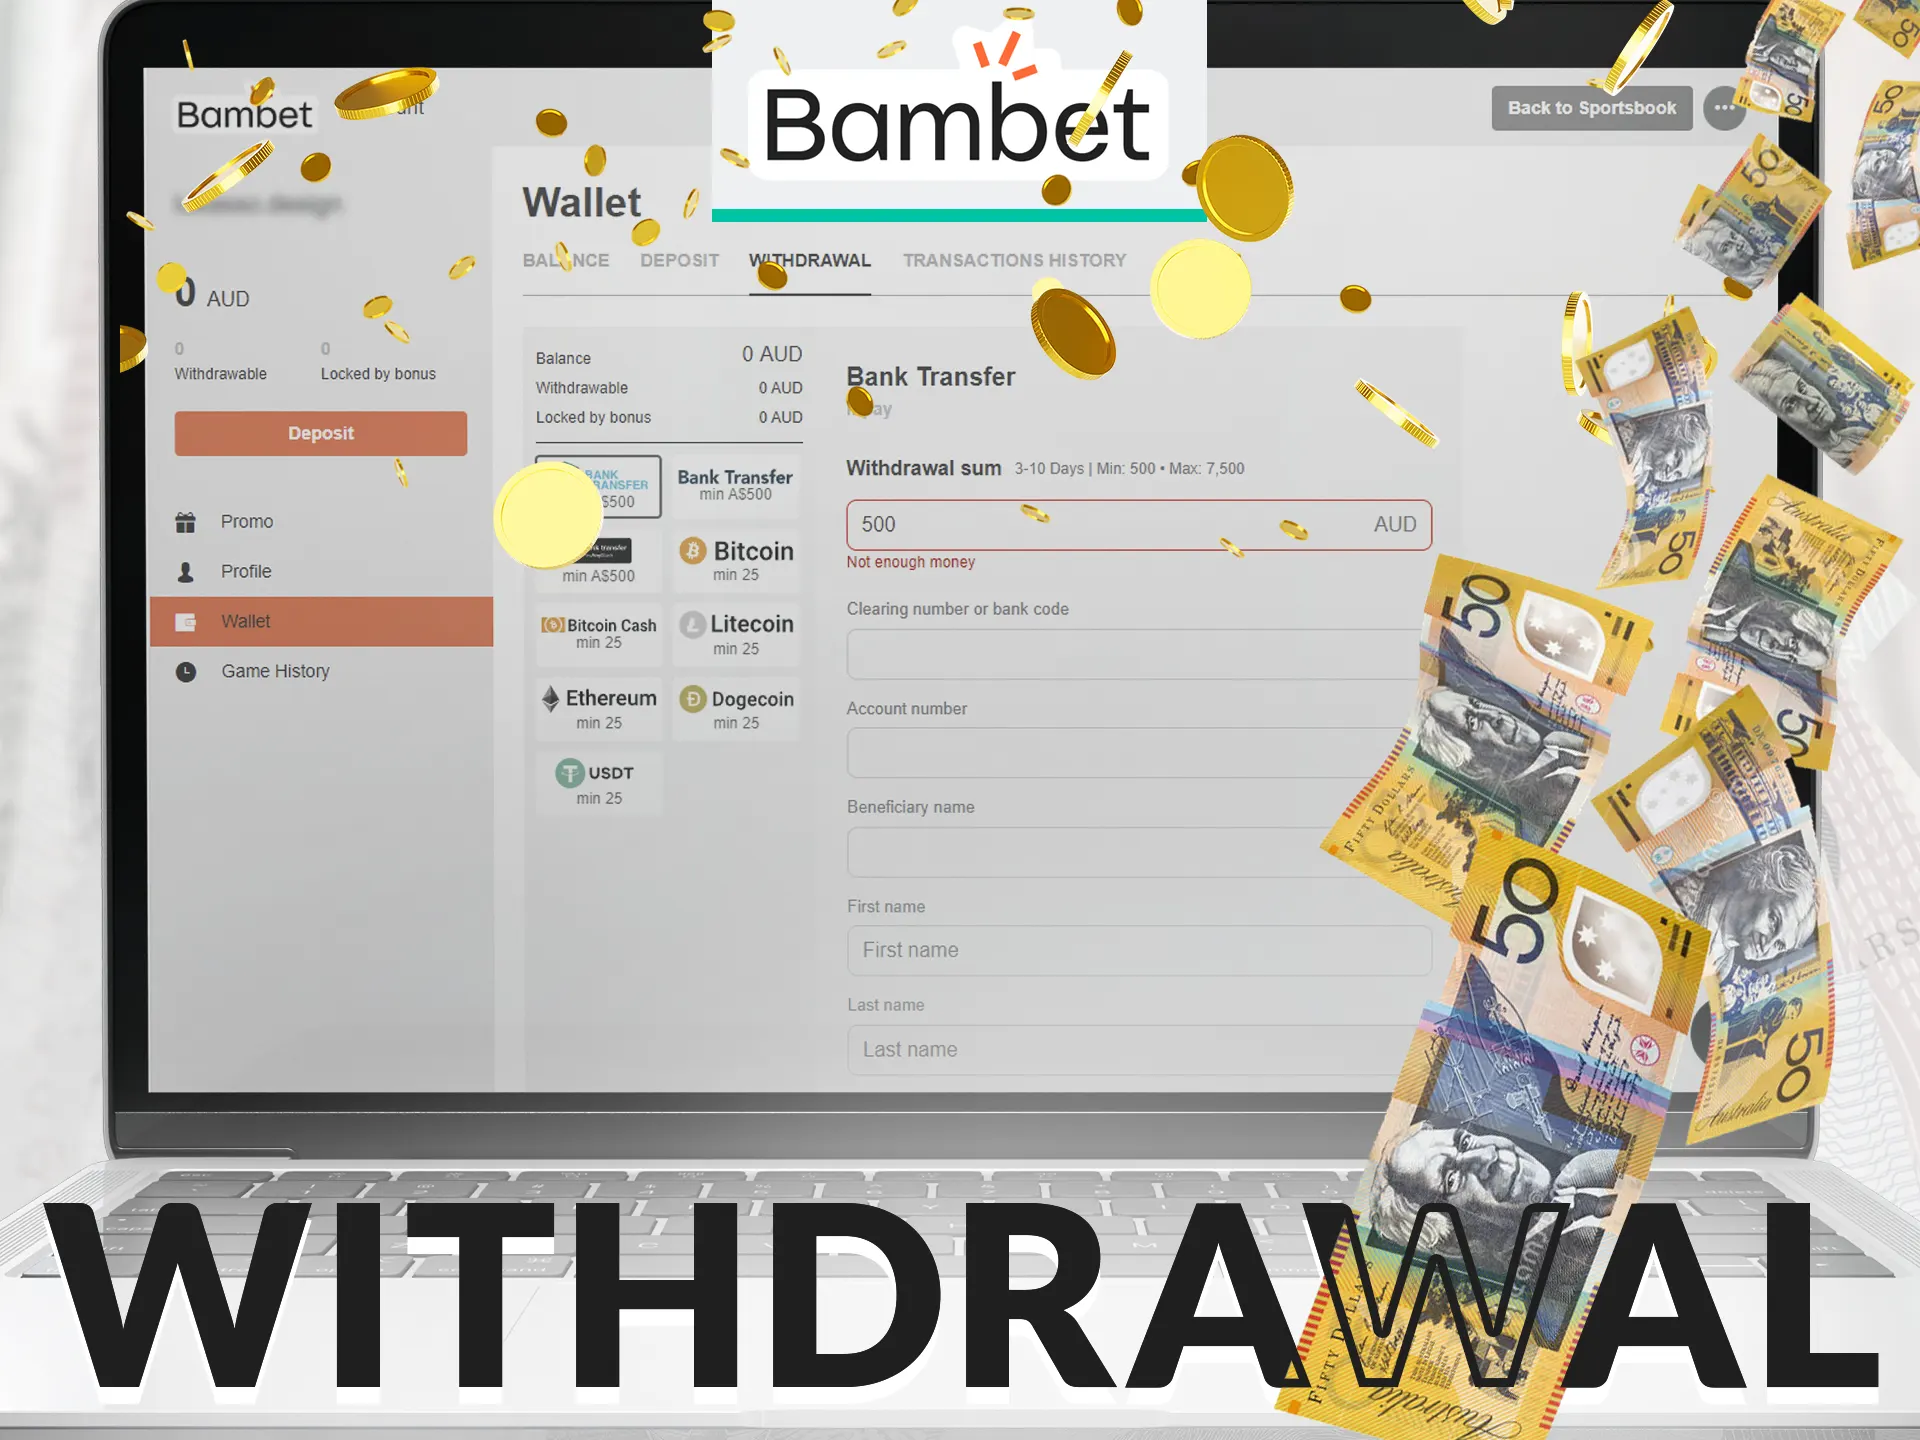 Bambet's Australian users enjoy flexible and reliable withdrawals with various options and limits.